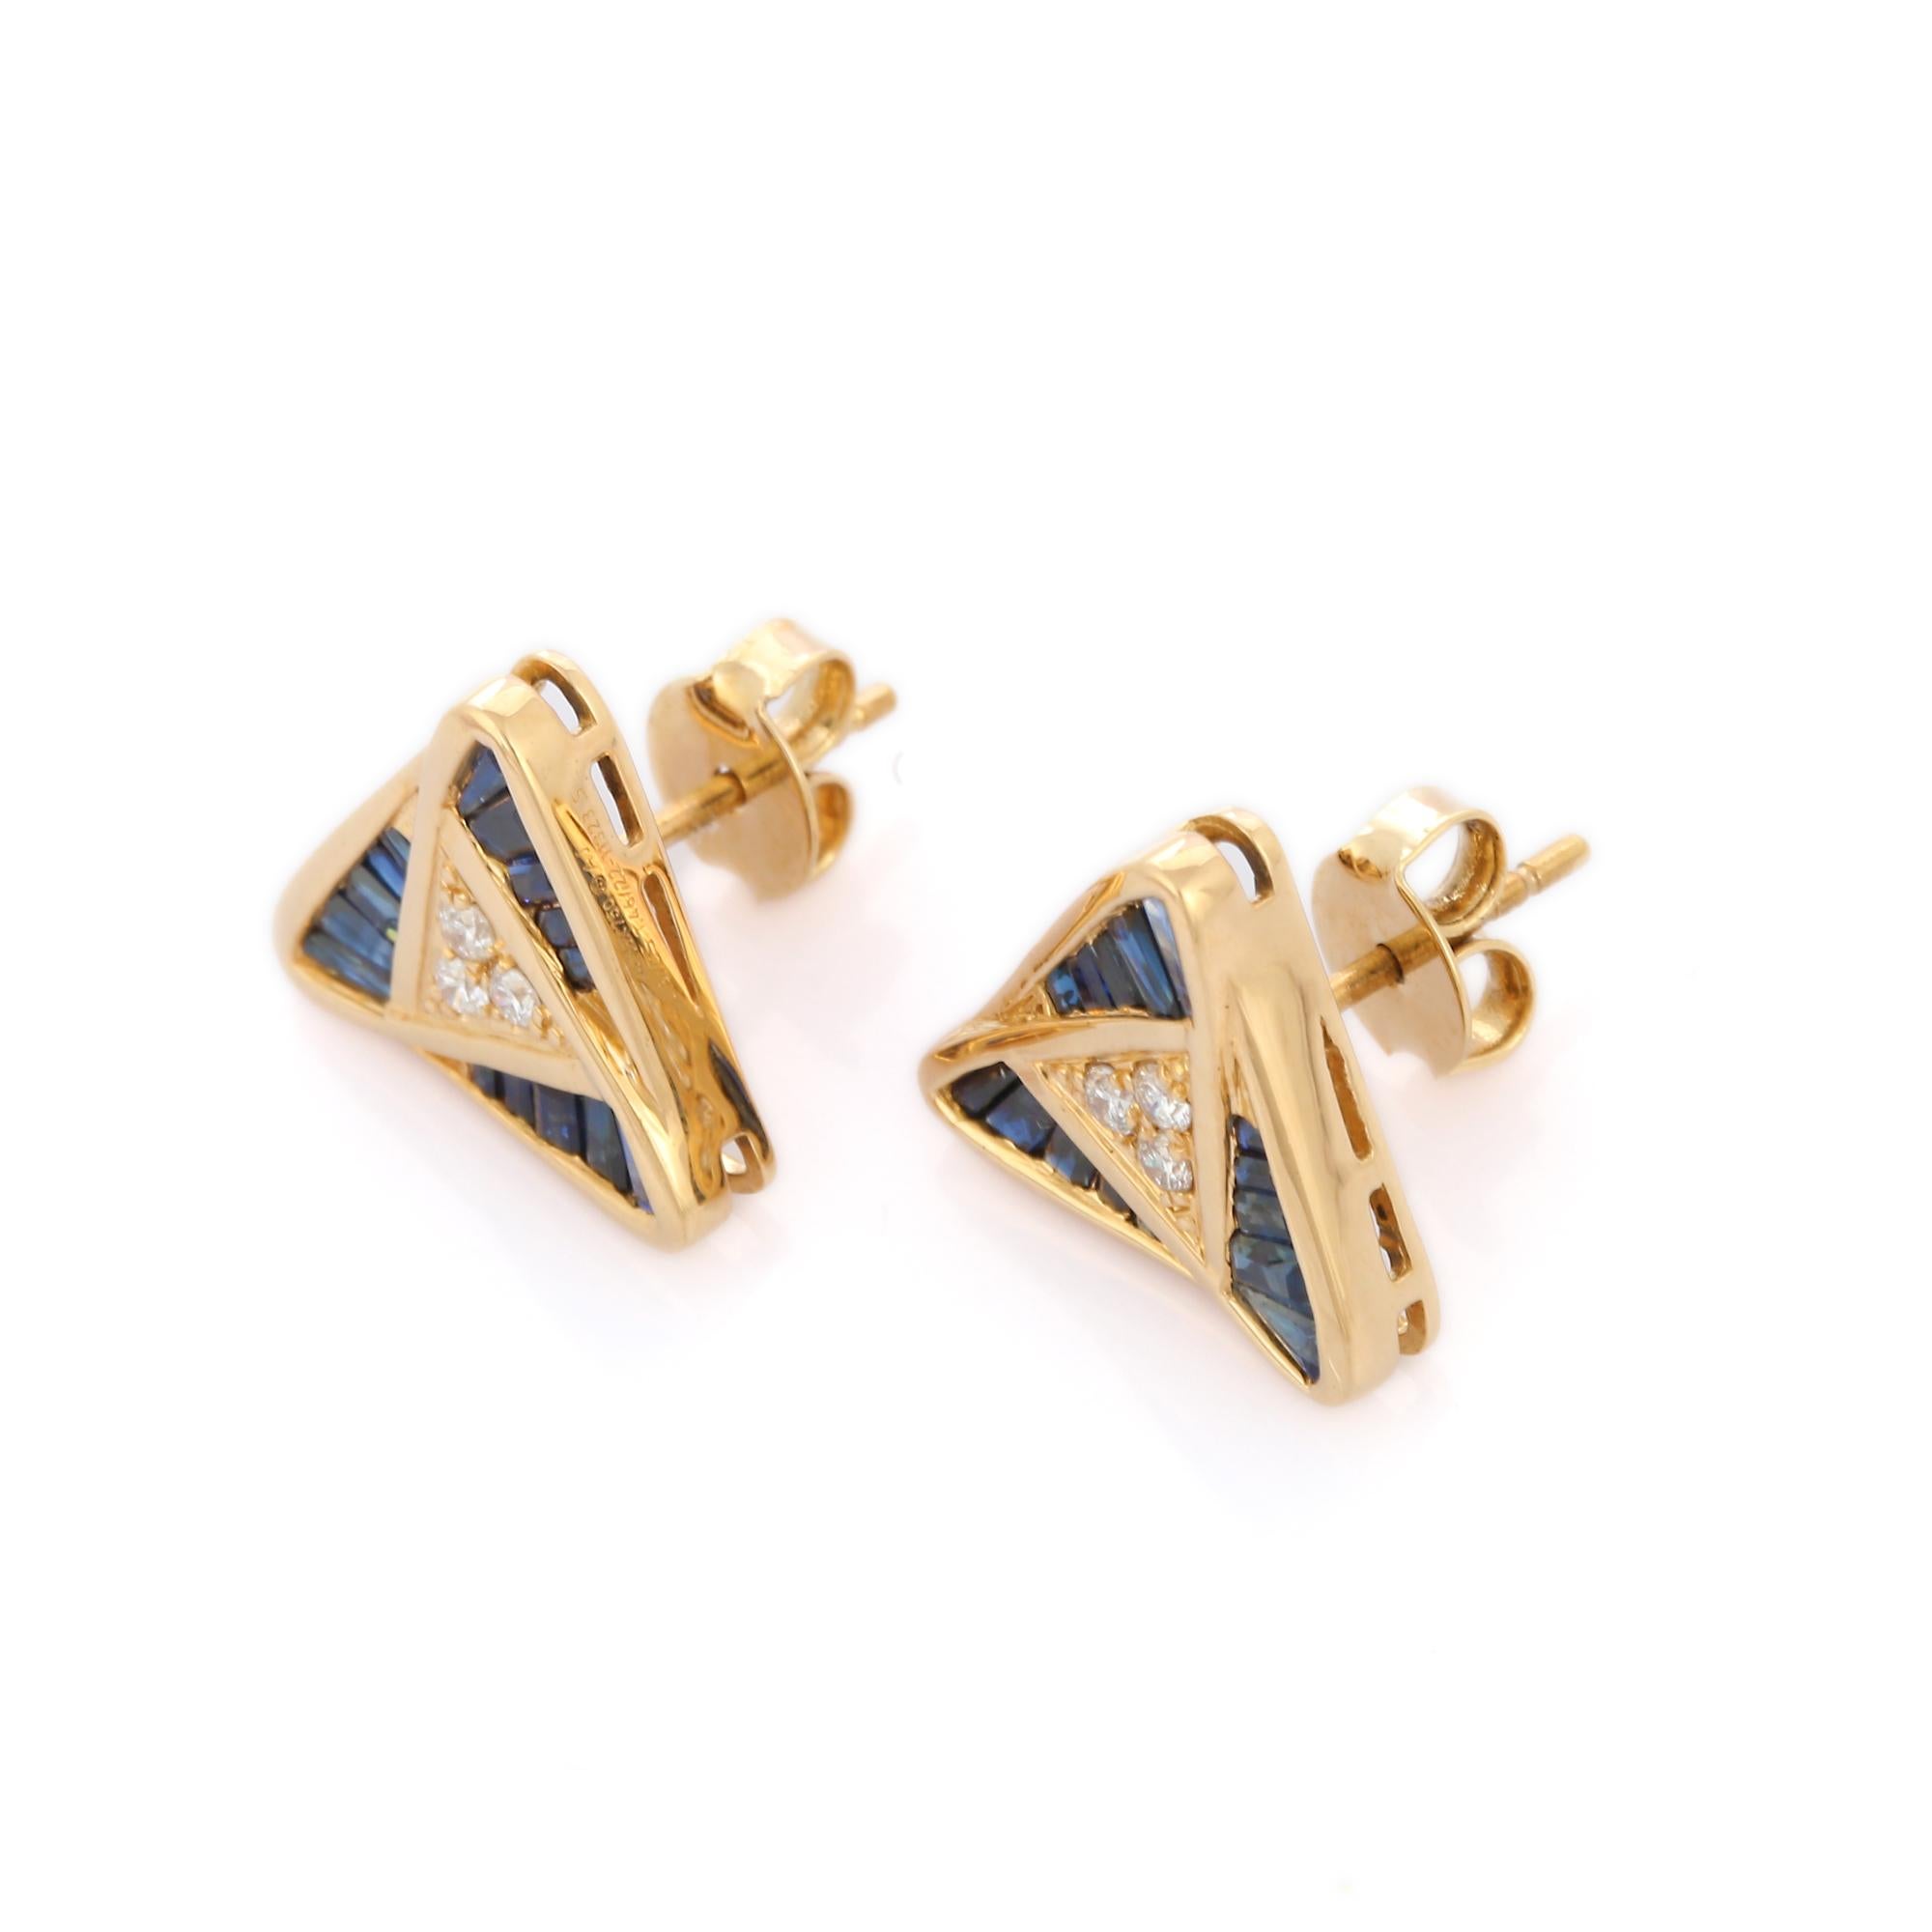 Studs create a subtle beauty while showcasing the colors of the natural precious gemstones and illuminating diamonds making a statement.

Baguette cut blue sapphire studs in 18K gold. Embrace your look with these stunning pair of earrings suitable